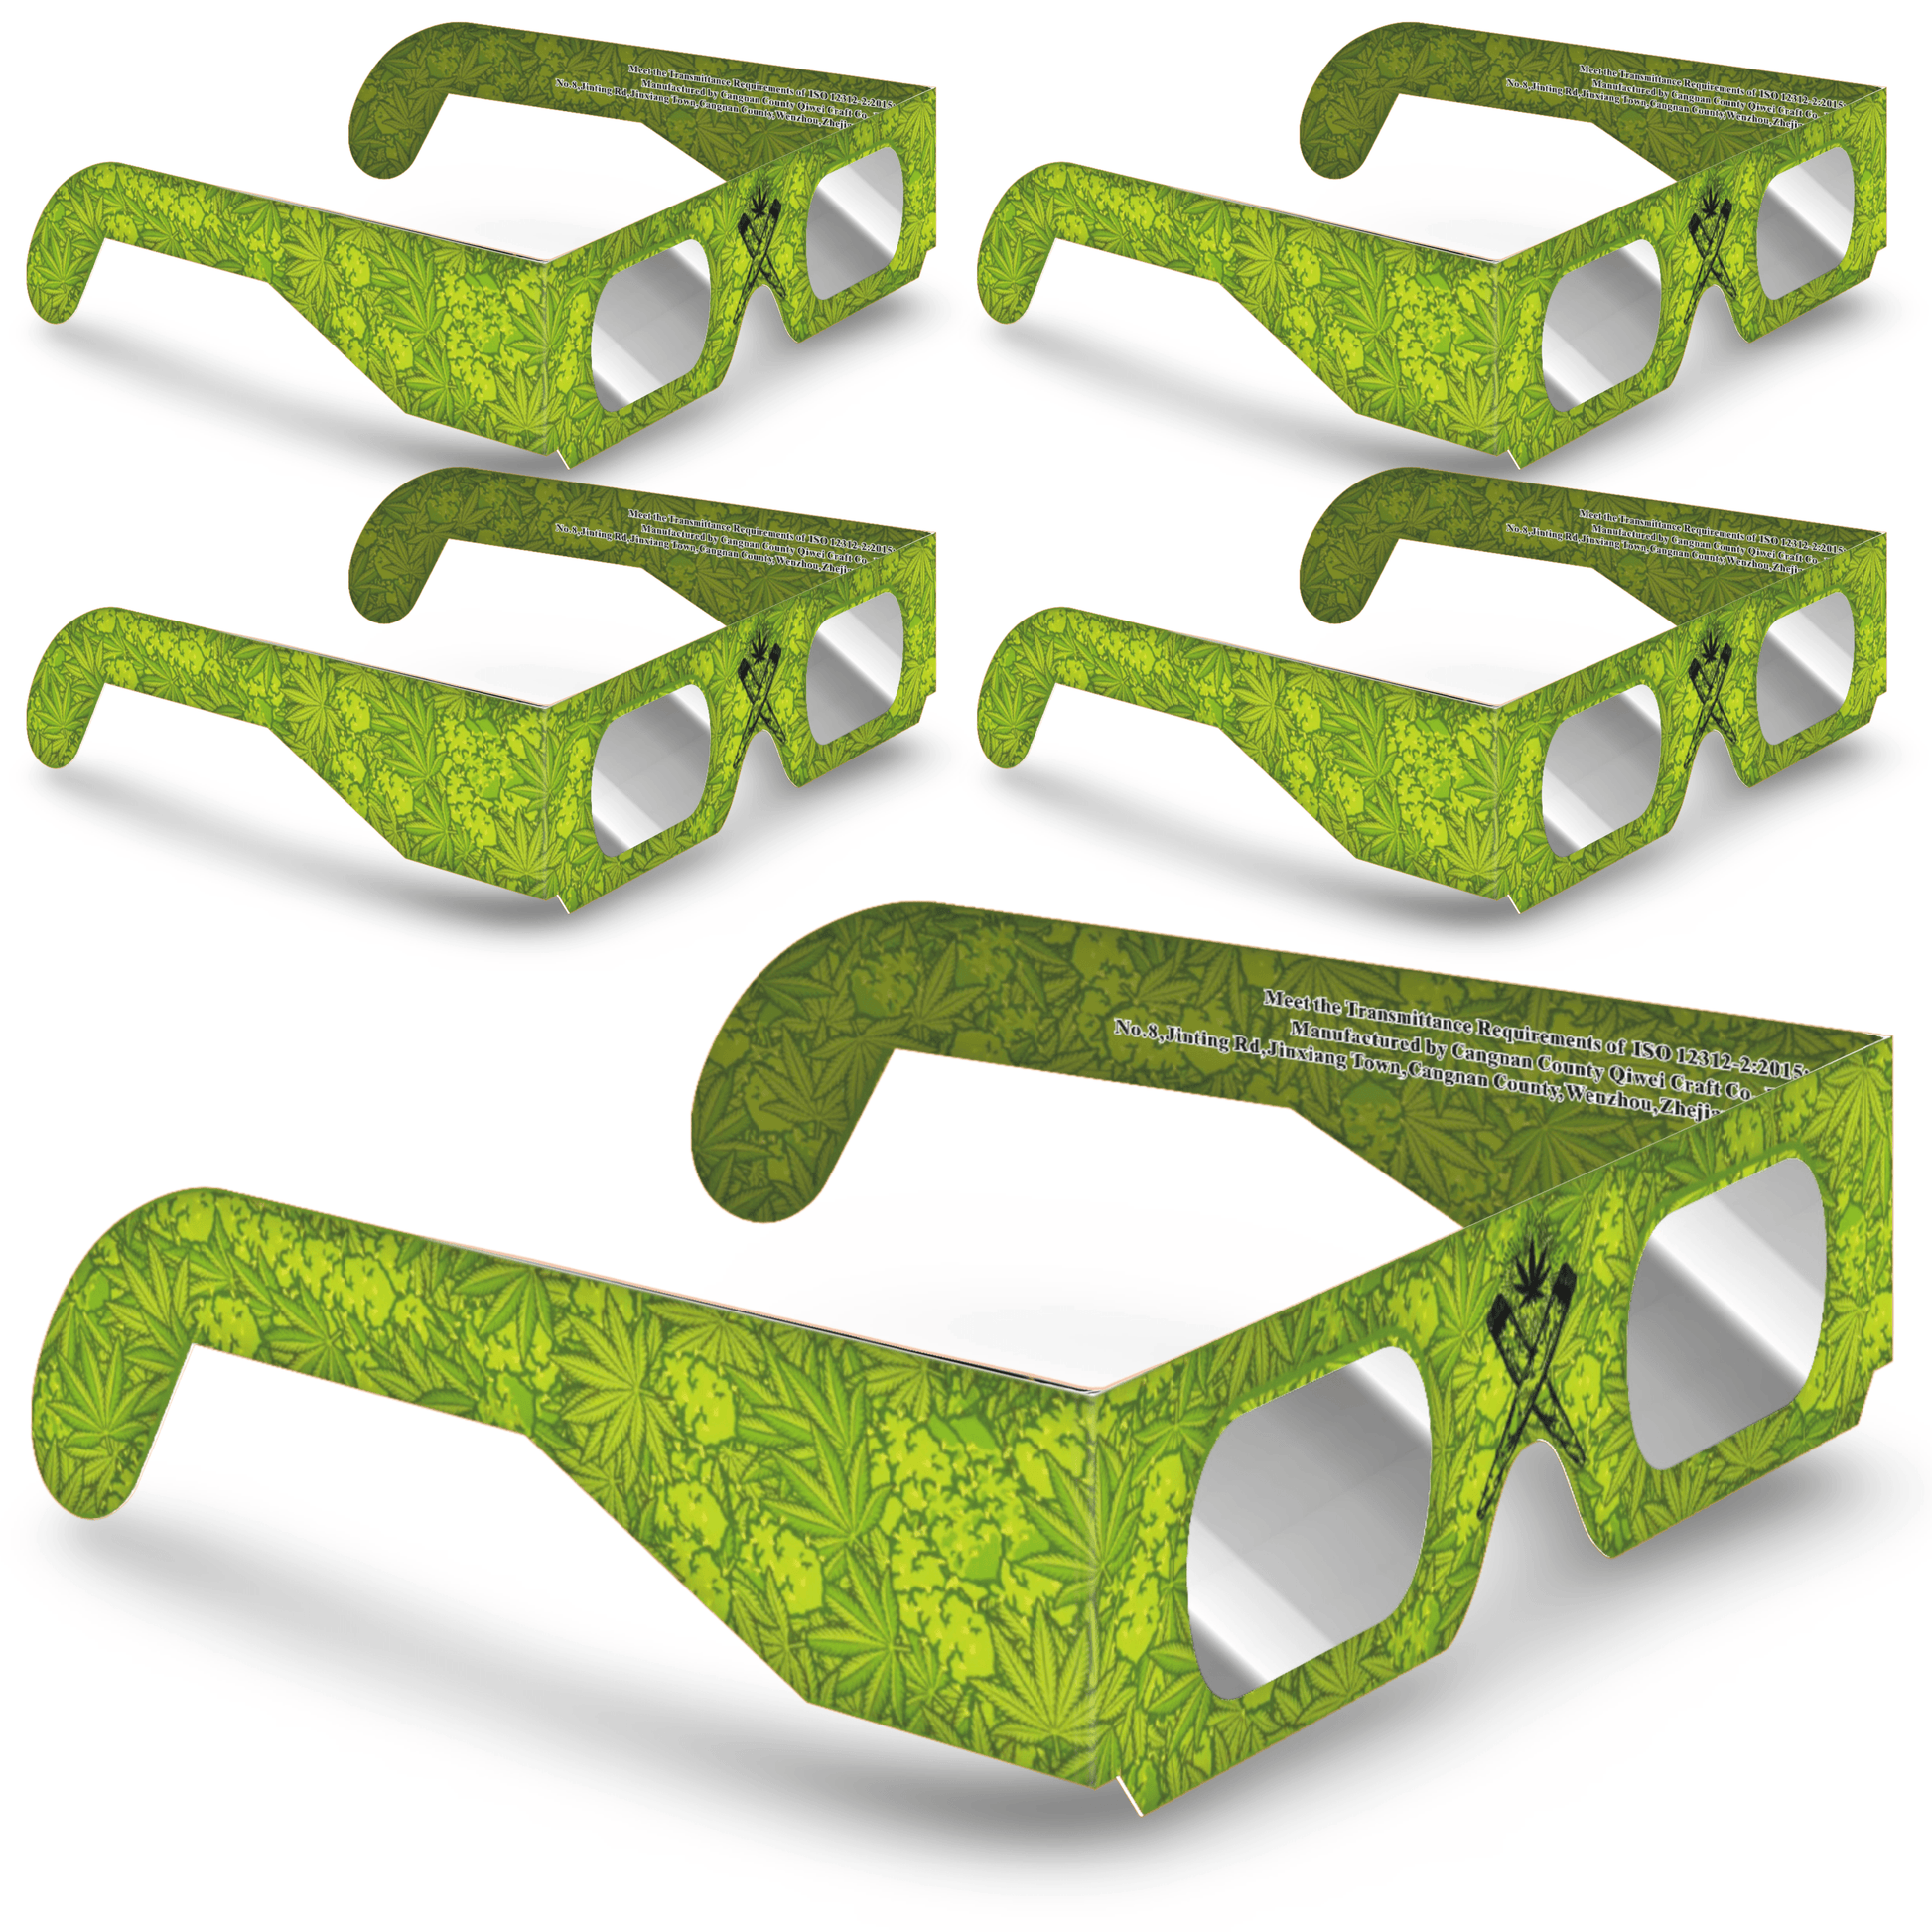 Solar Eclipse Glasses - Cannabis (18+) - Absolute Eclipse